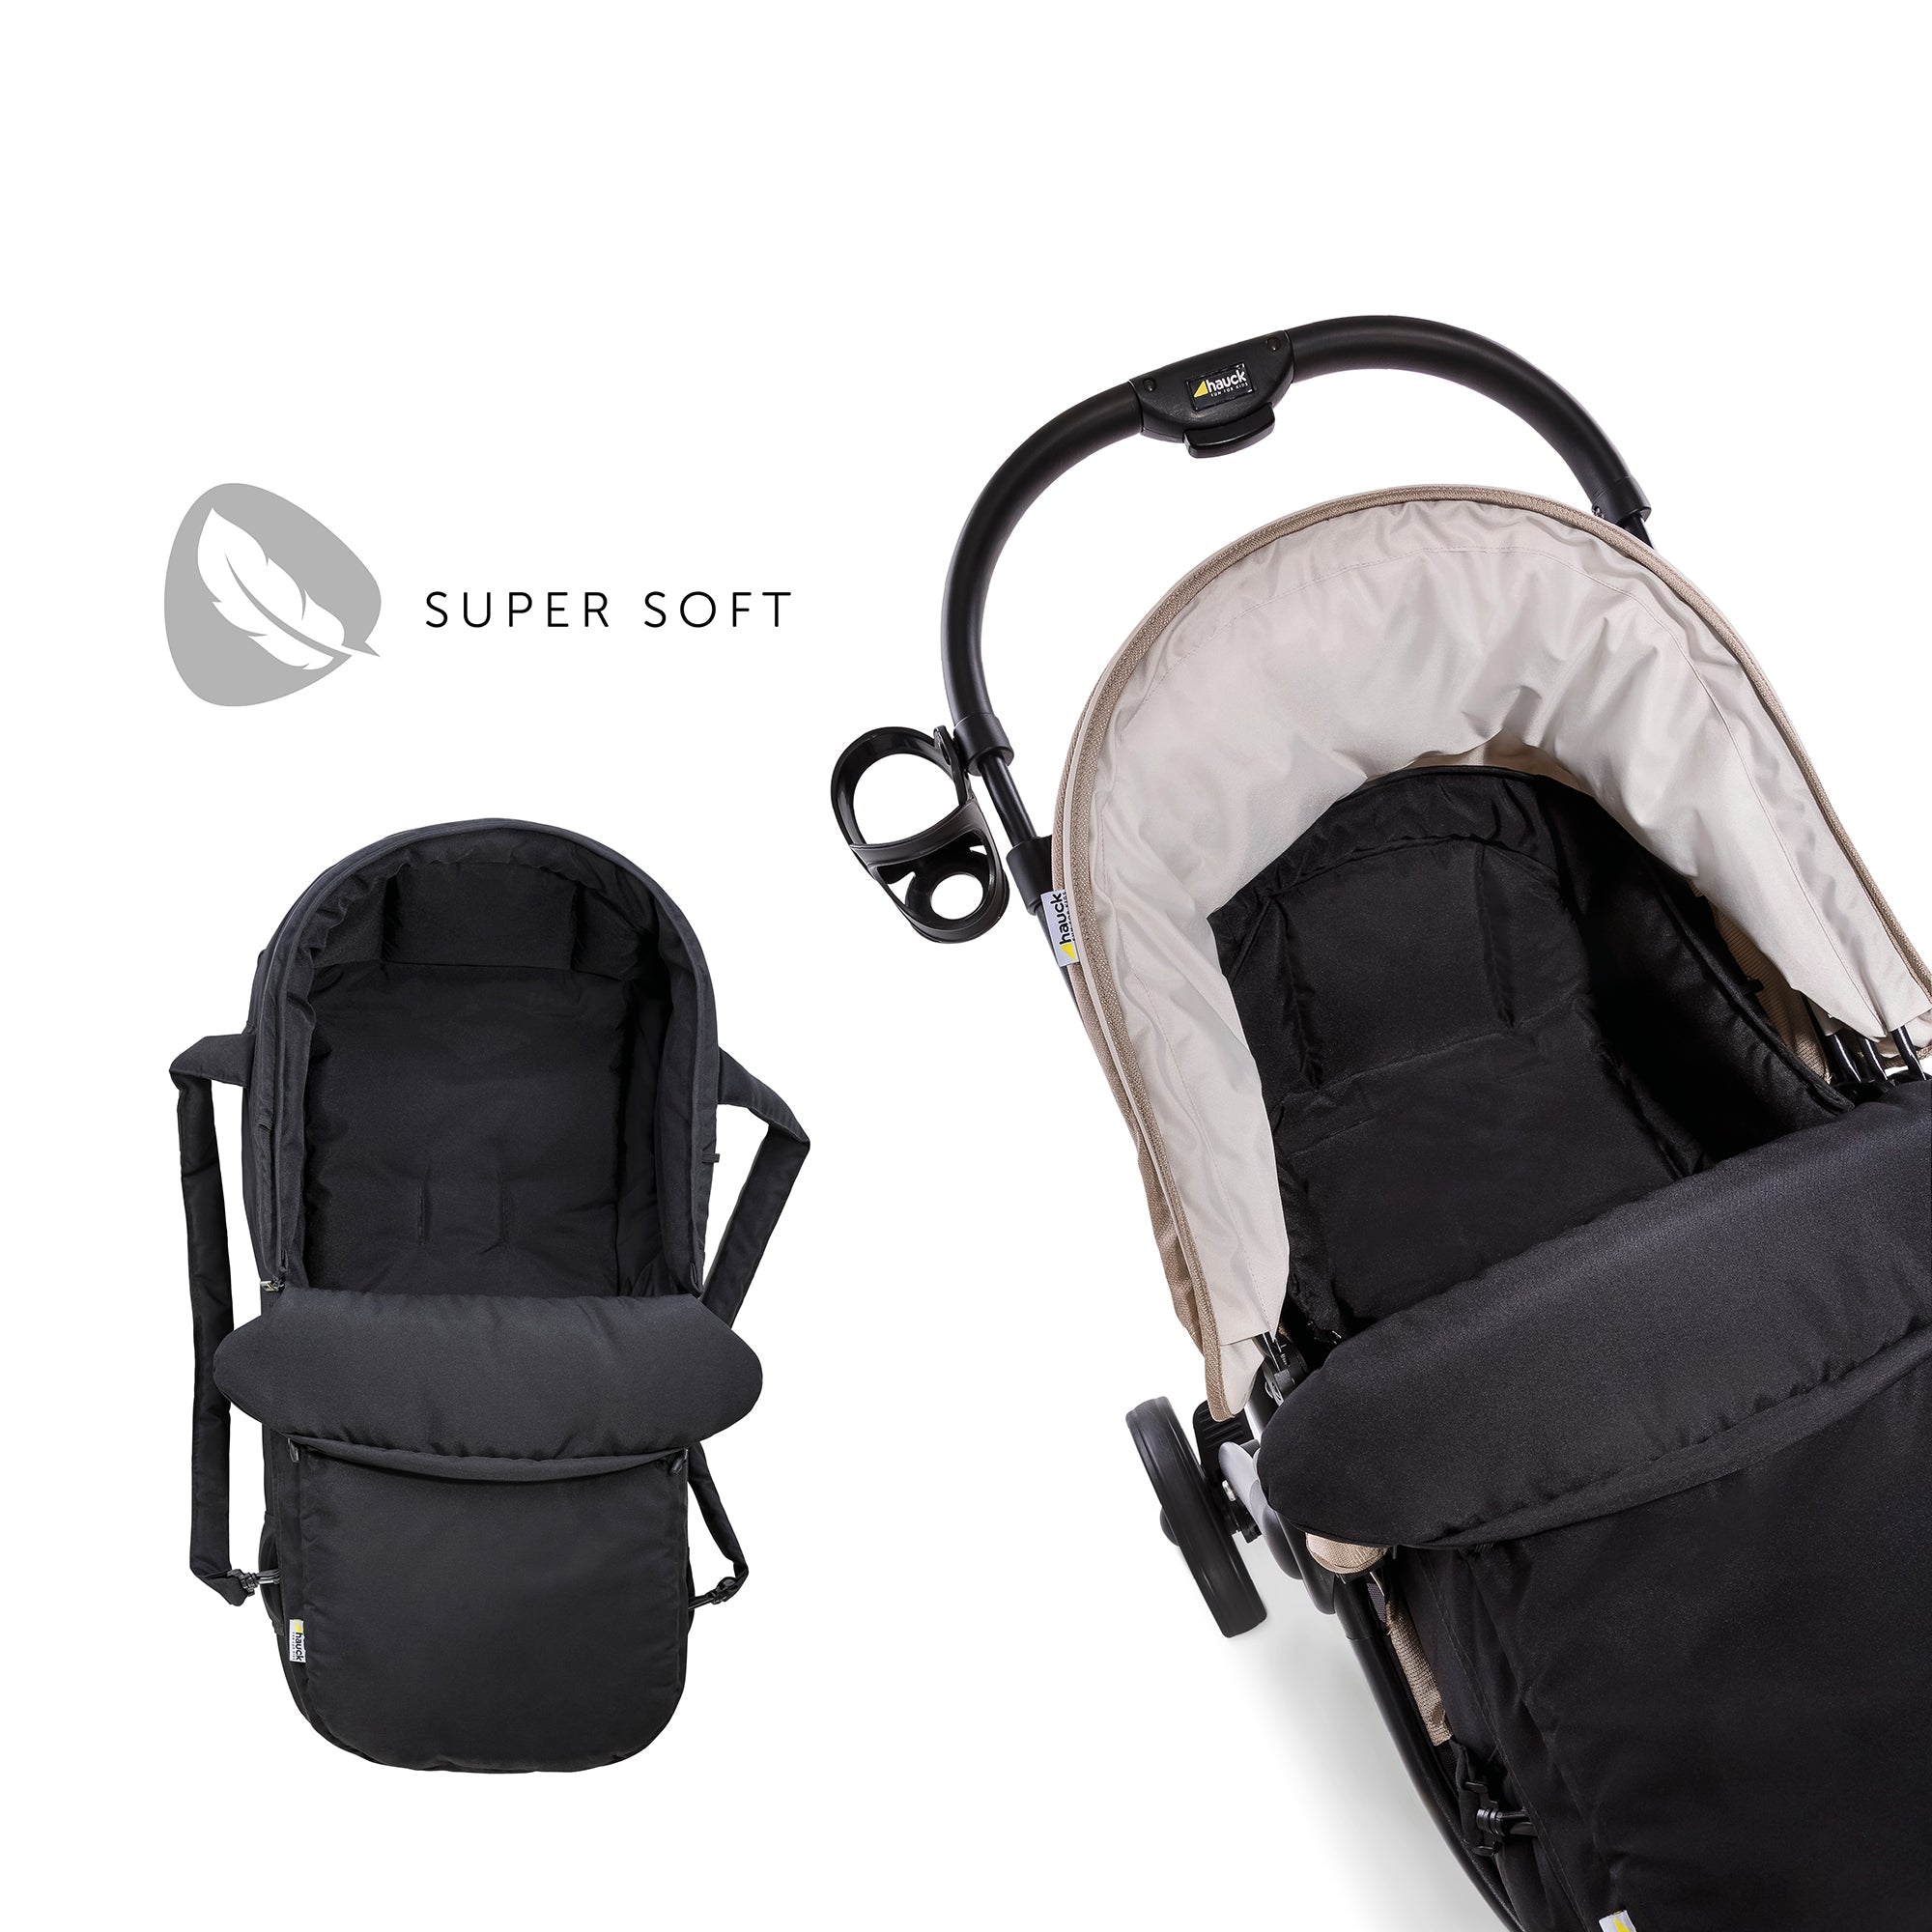 Hauck 2 in1 Carrycot || Fashion-Black || Birth+ to 9months - Toys4All.in